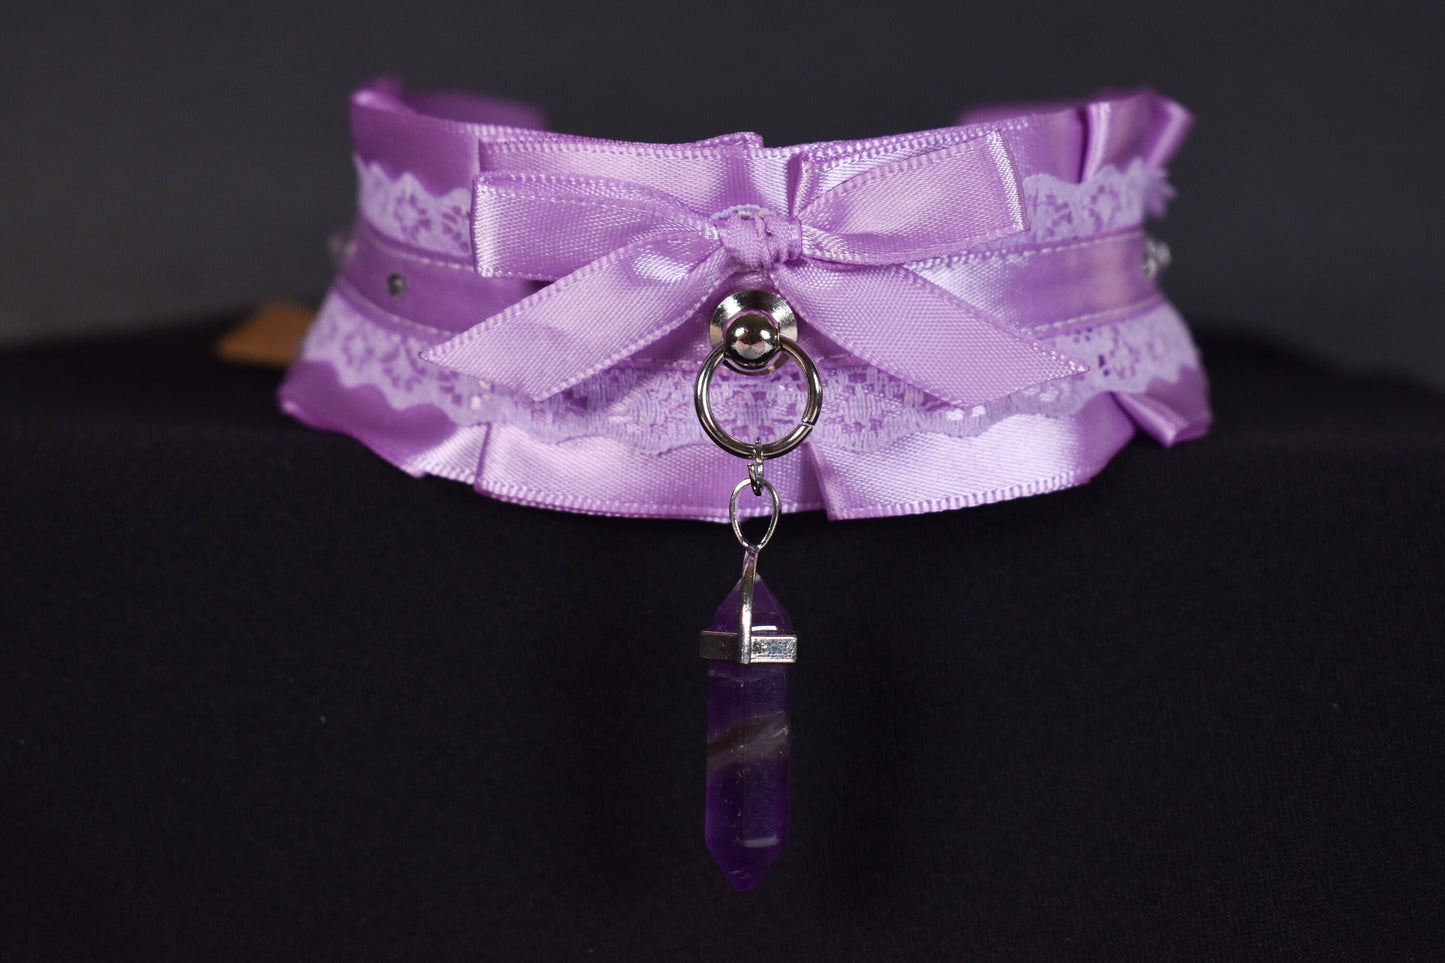 Made to your size / Lavender Amethyst choker / goth / emo / kitten play / alt fashion / bdsm / pet play necklace / kawaii fashion